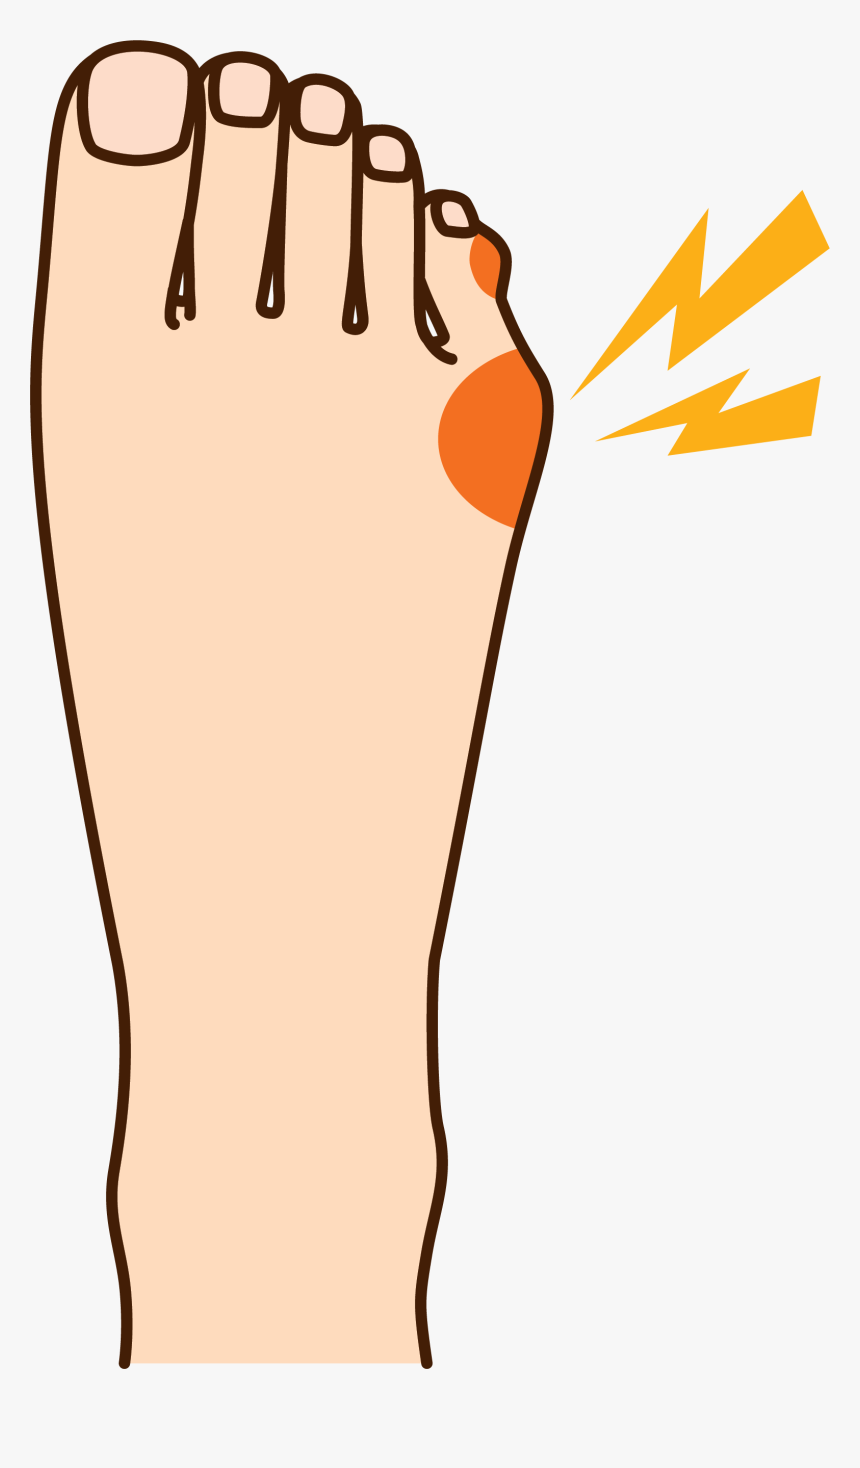 How To Relieve Your Tailor"s Bunion Pain - Bunionette On Pinky Toe, HD Png Download, Free Download